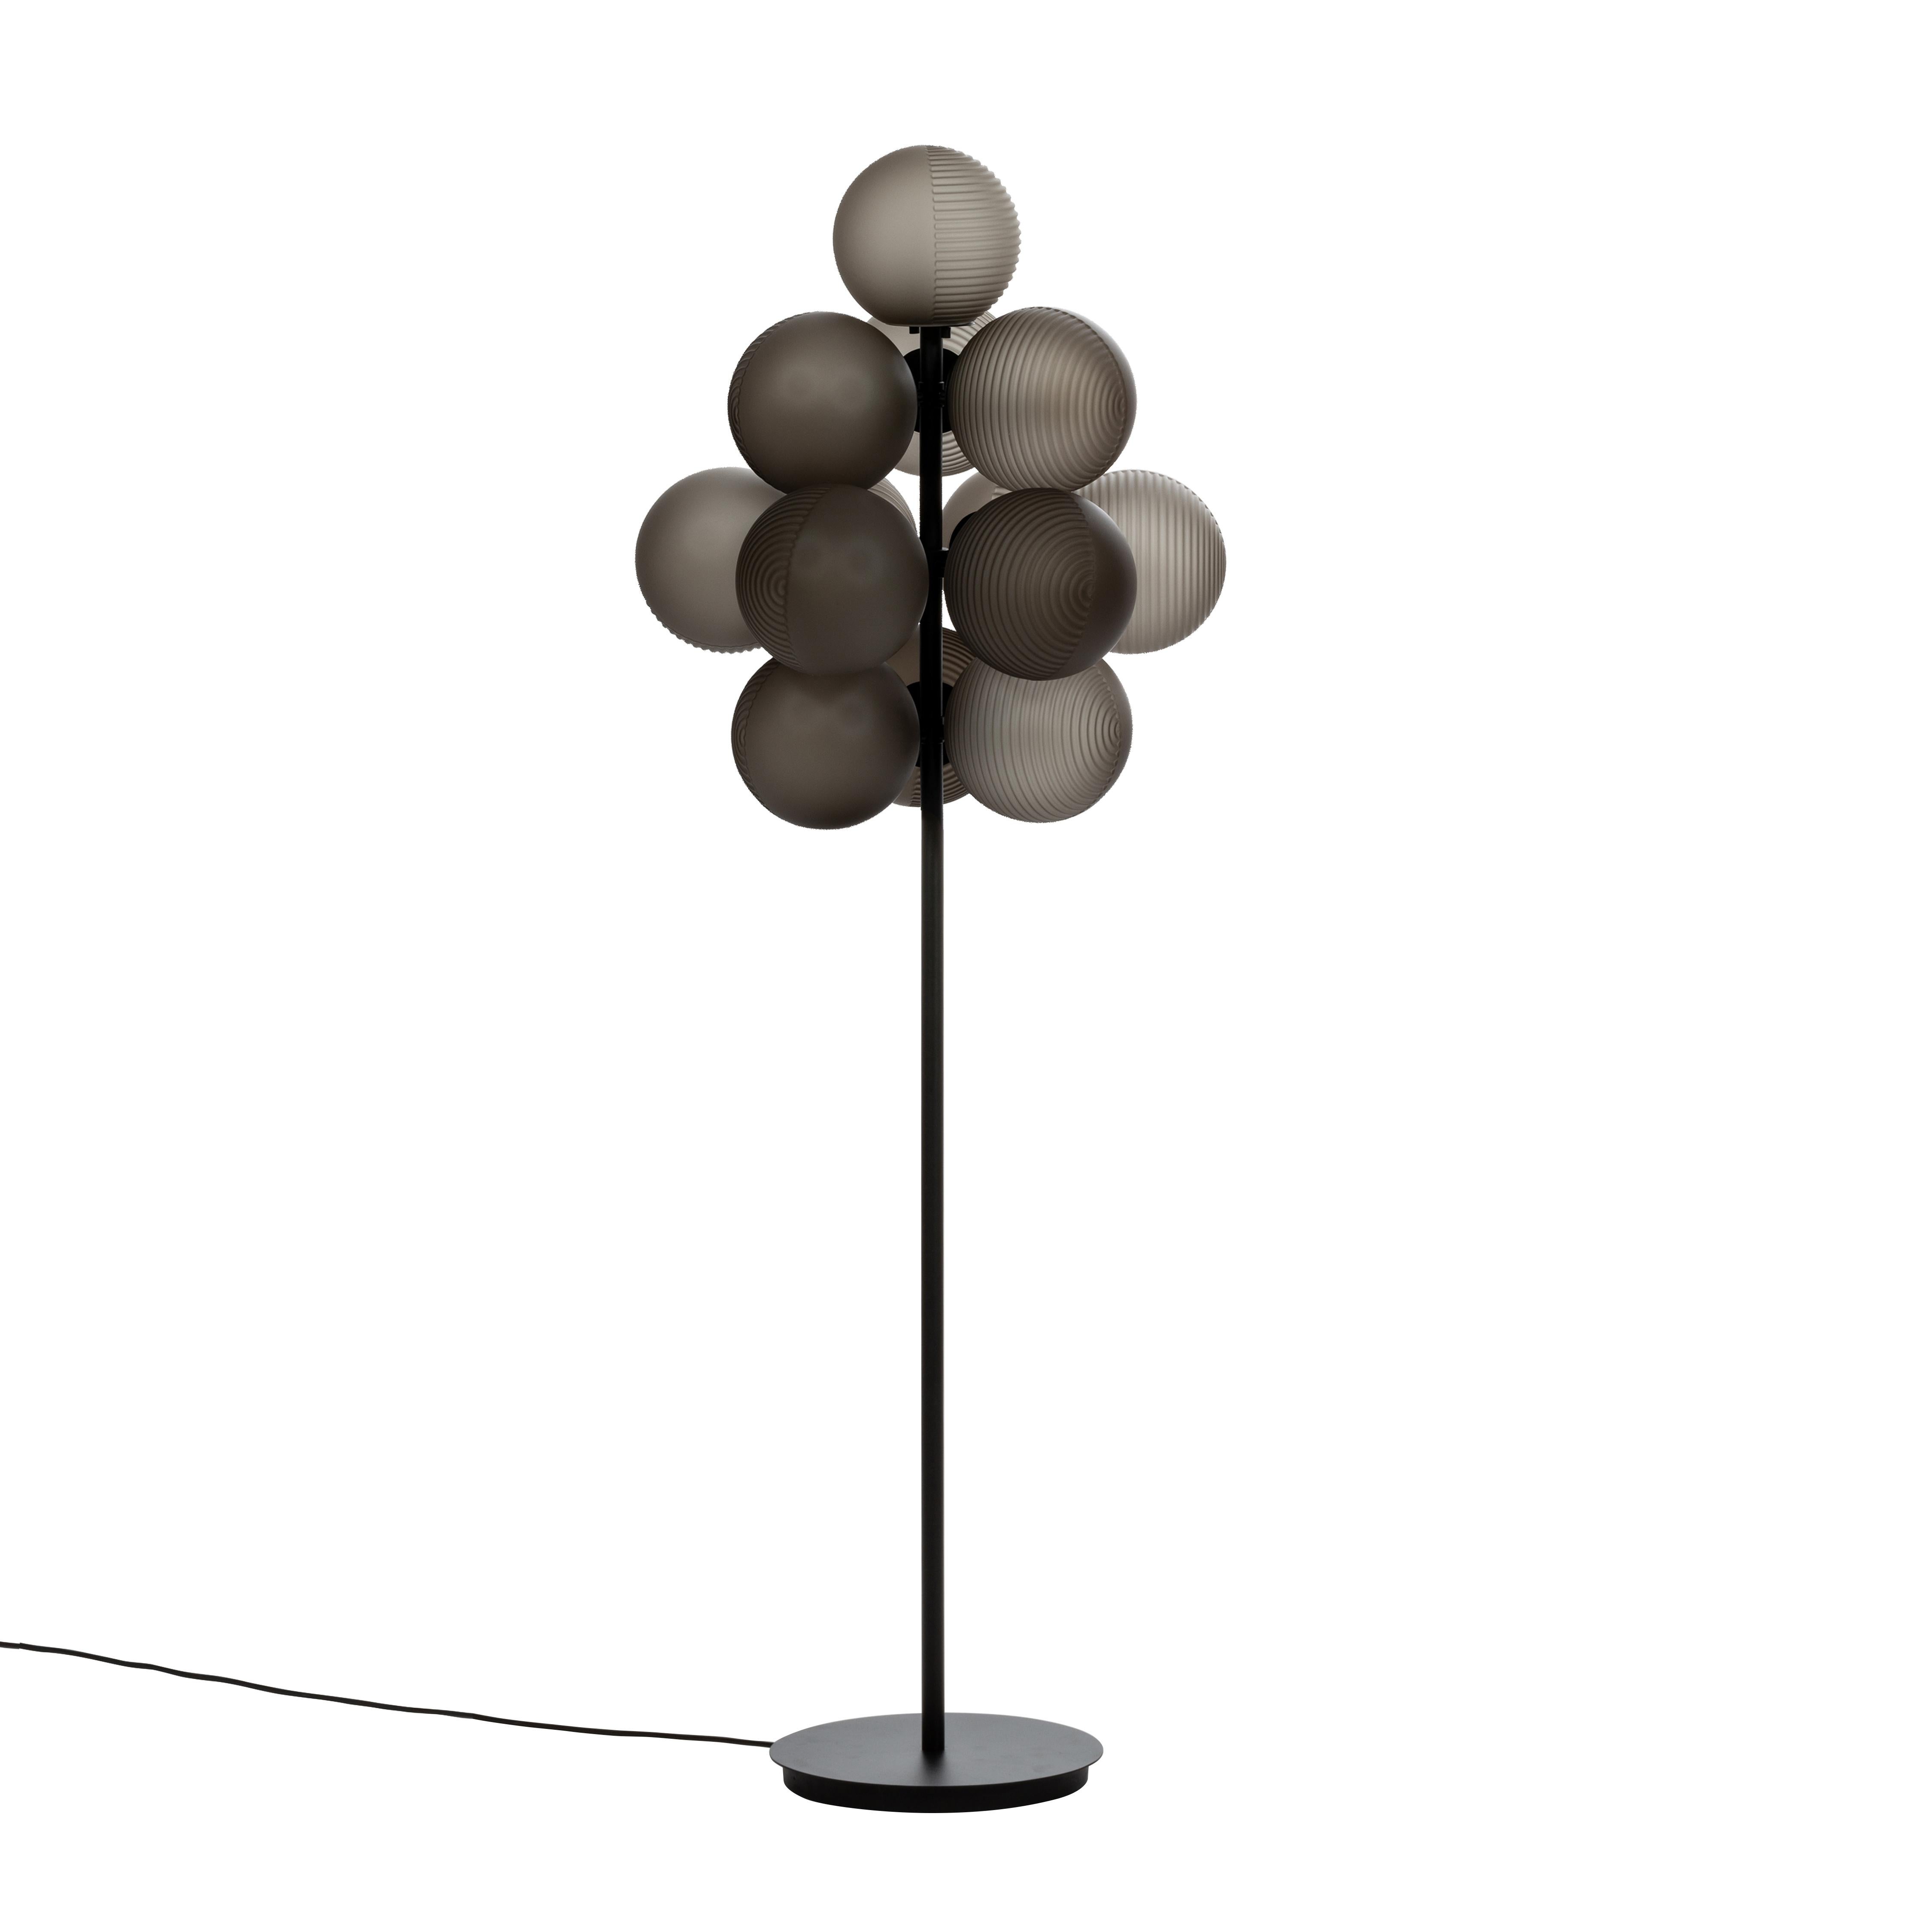 Stellar grape big smoky grey acetato black floor light by Pulpo
Dimensions: D61 x H158 cm
Materials: handblown glass coloured ,powder coated steel.

Also available in different finishes. Height can be customised. 

Raised up above the clouds